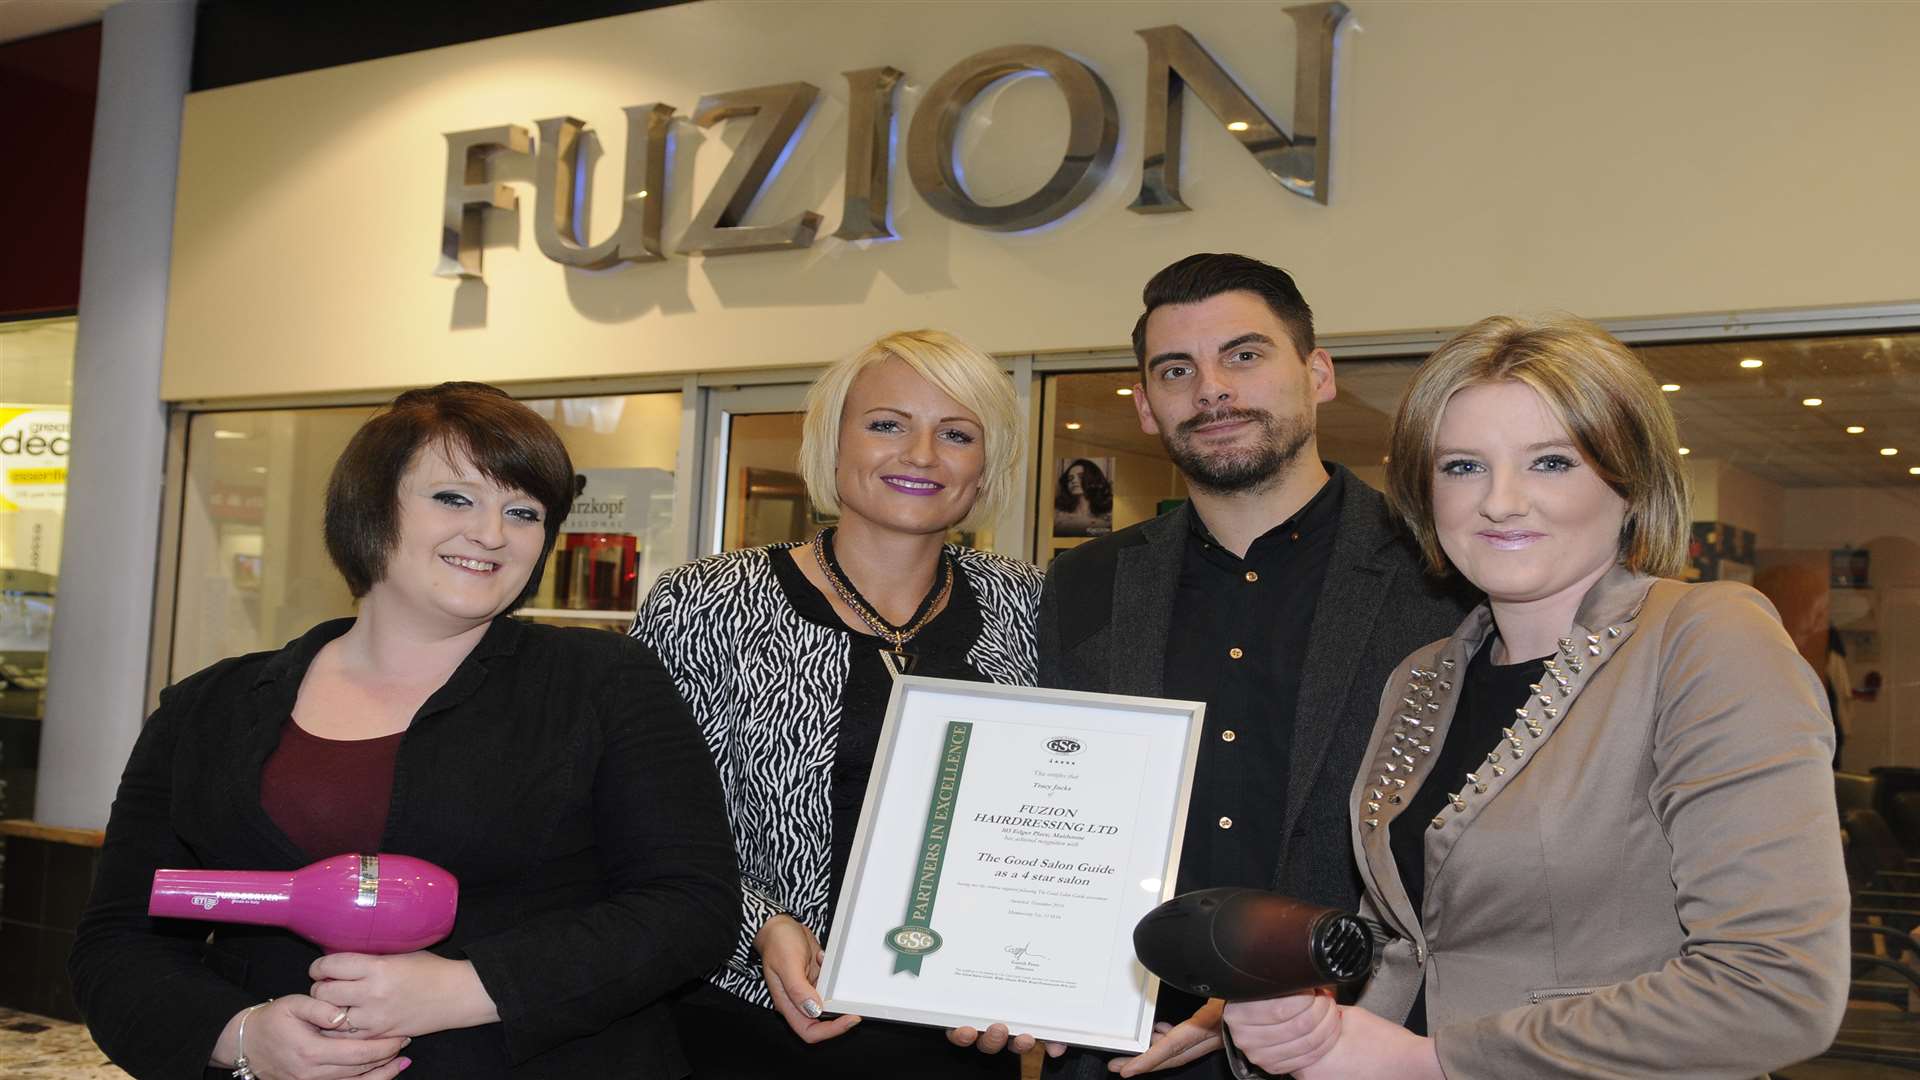 Left to right — Christina Cook, owner of Fuzion Tracy Jacks, Martin Durrant from the Good Salon Guide, and Amy Seymour. Picture: Ruth Cuerden